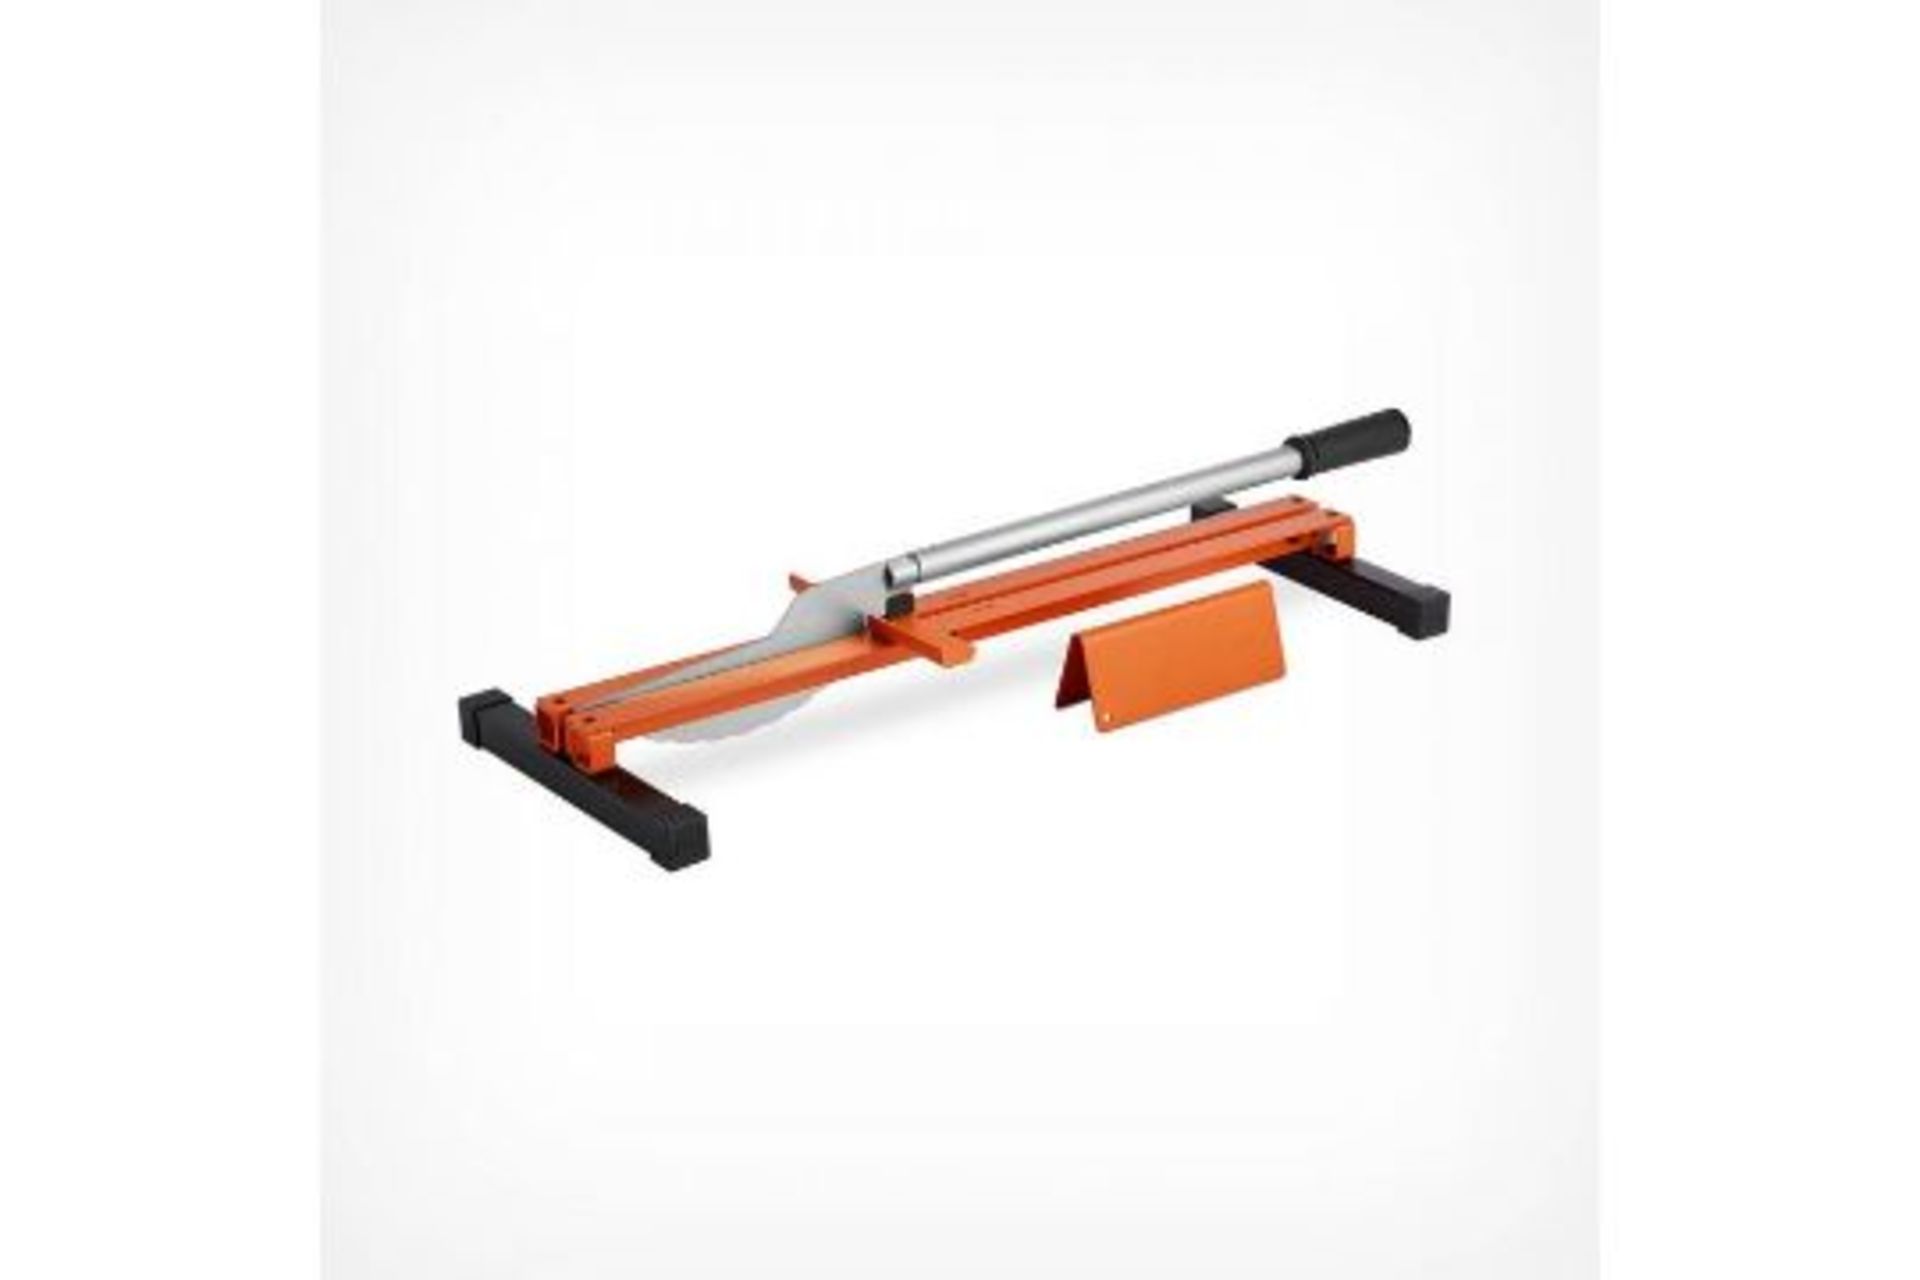 Laminate Floor Cutter 600mm. Whether you’re a seasoned home improver or installing laminate flooring